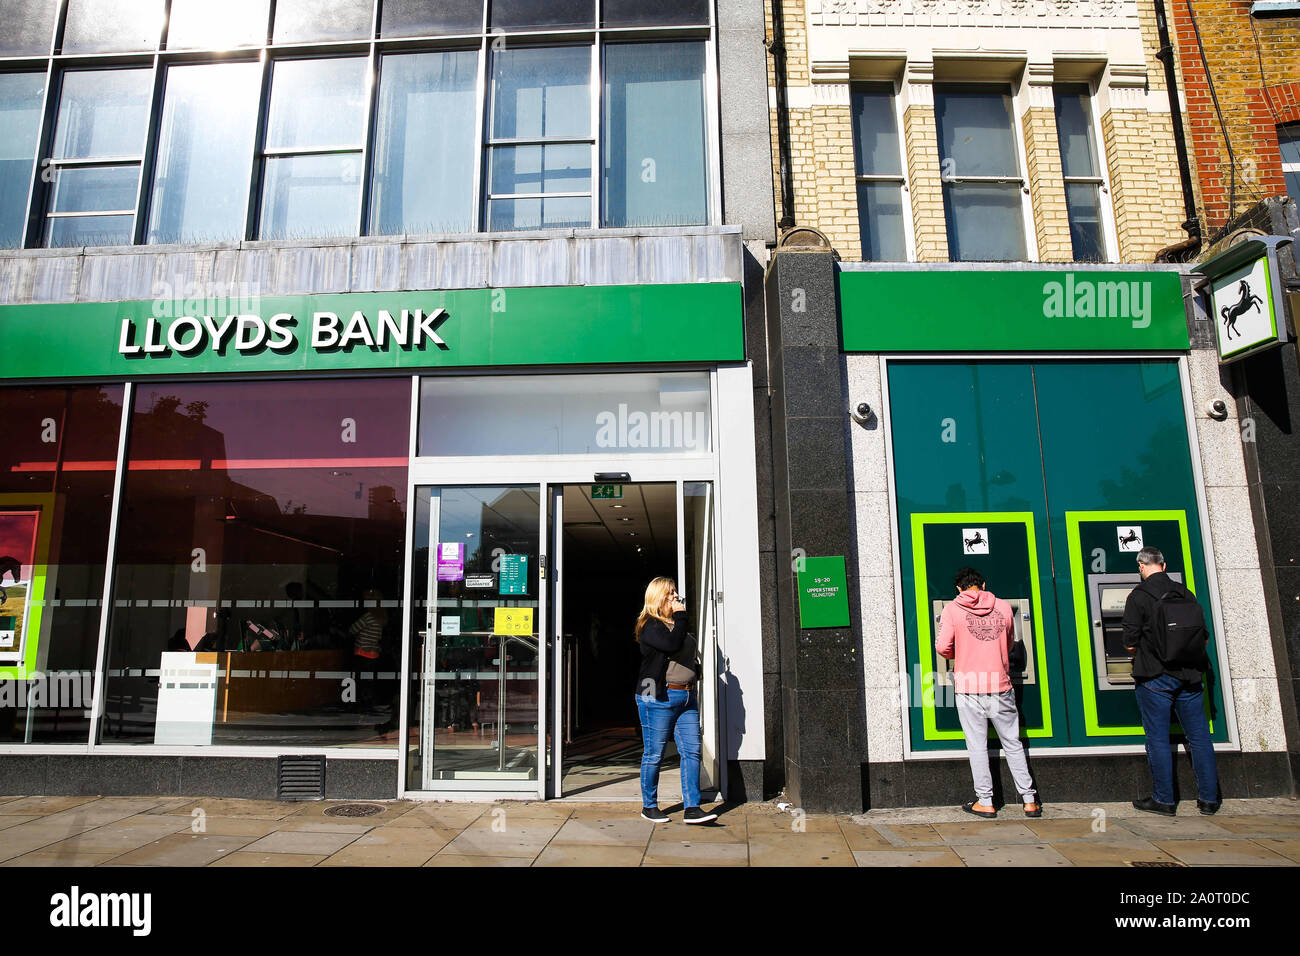 September 21, 2019, London, United Kingdom: An exterior view of Lloyds Bank in central London. Lloyds Bank plc is a British retail and commercial bank with branches across England and Wales. (Credit Image: © Dinendra Haria/SOPA Images via ZUMA Wire) Stock Photo